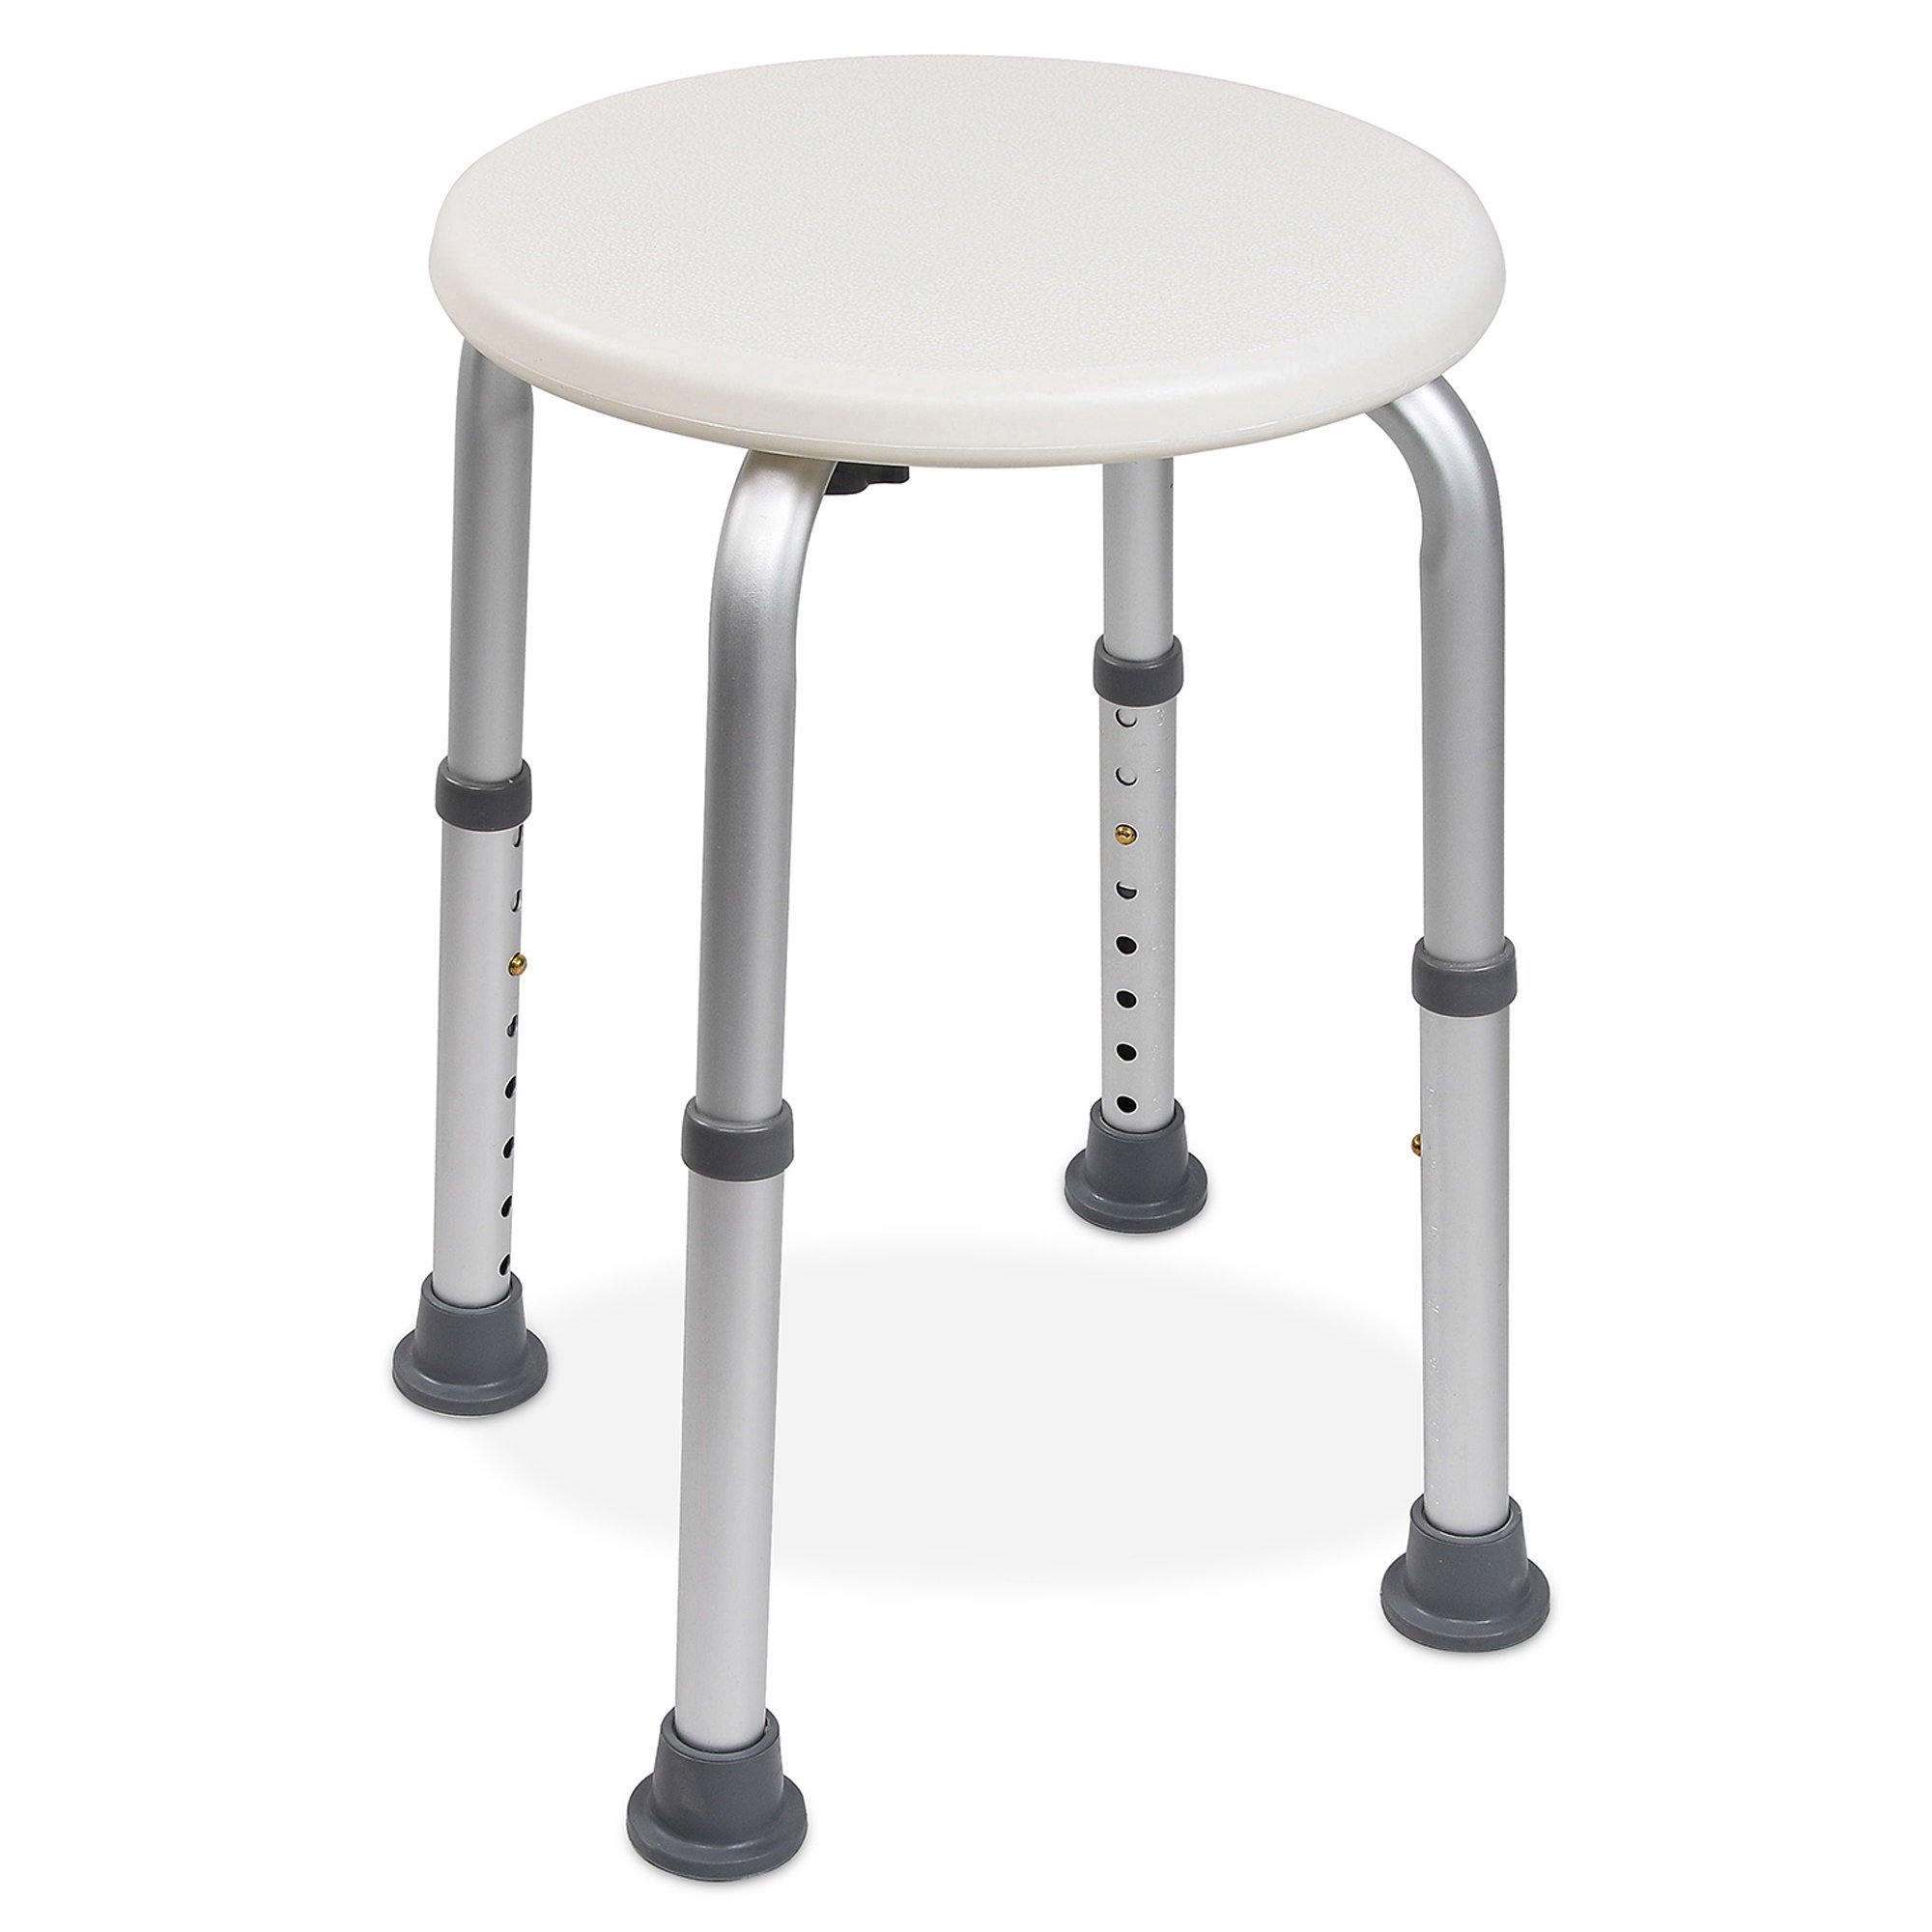 McKesson Shower Stool, 13 Inch Seat Width, 300 lbs. Weight Capacity, White